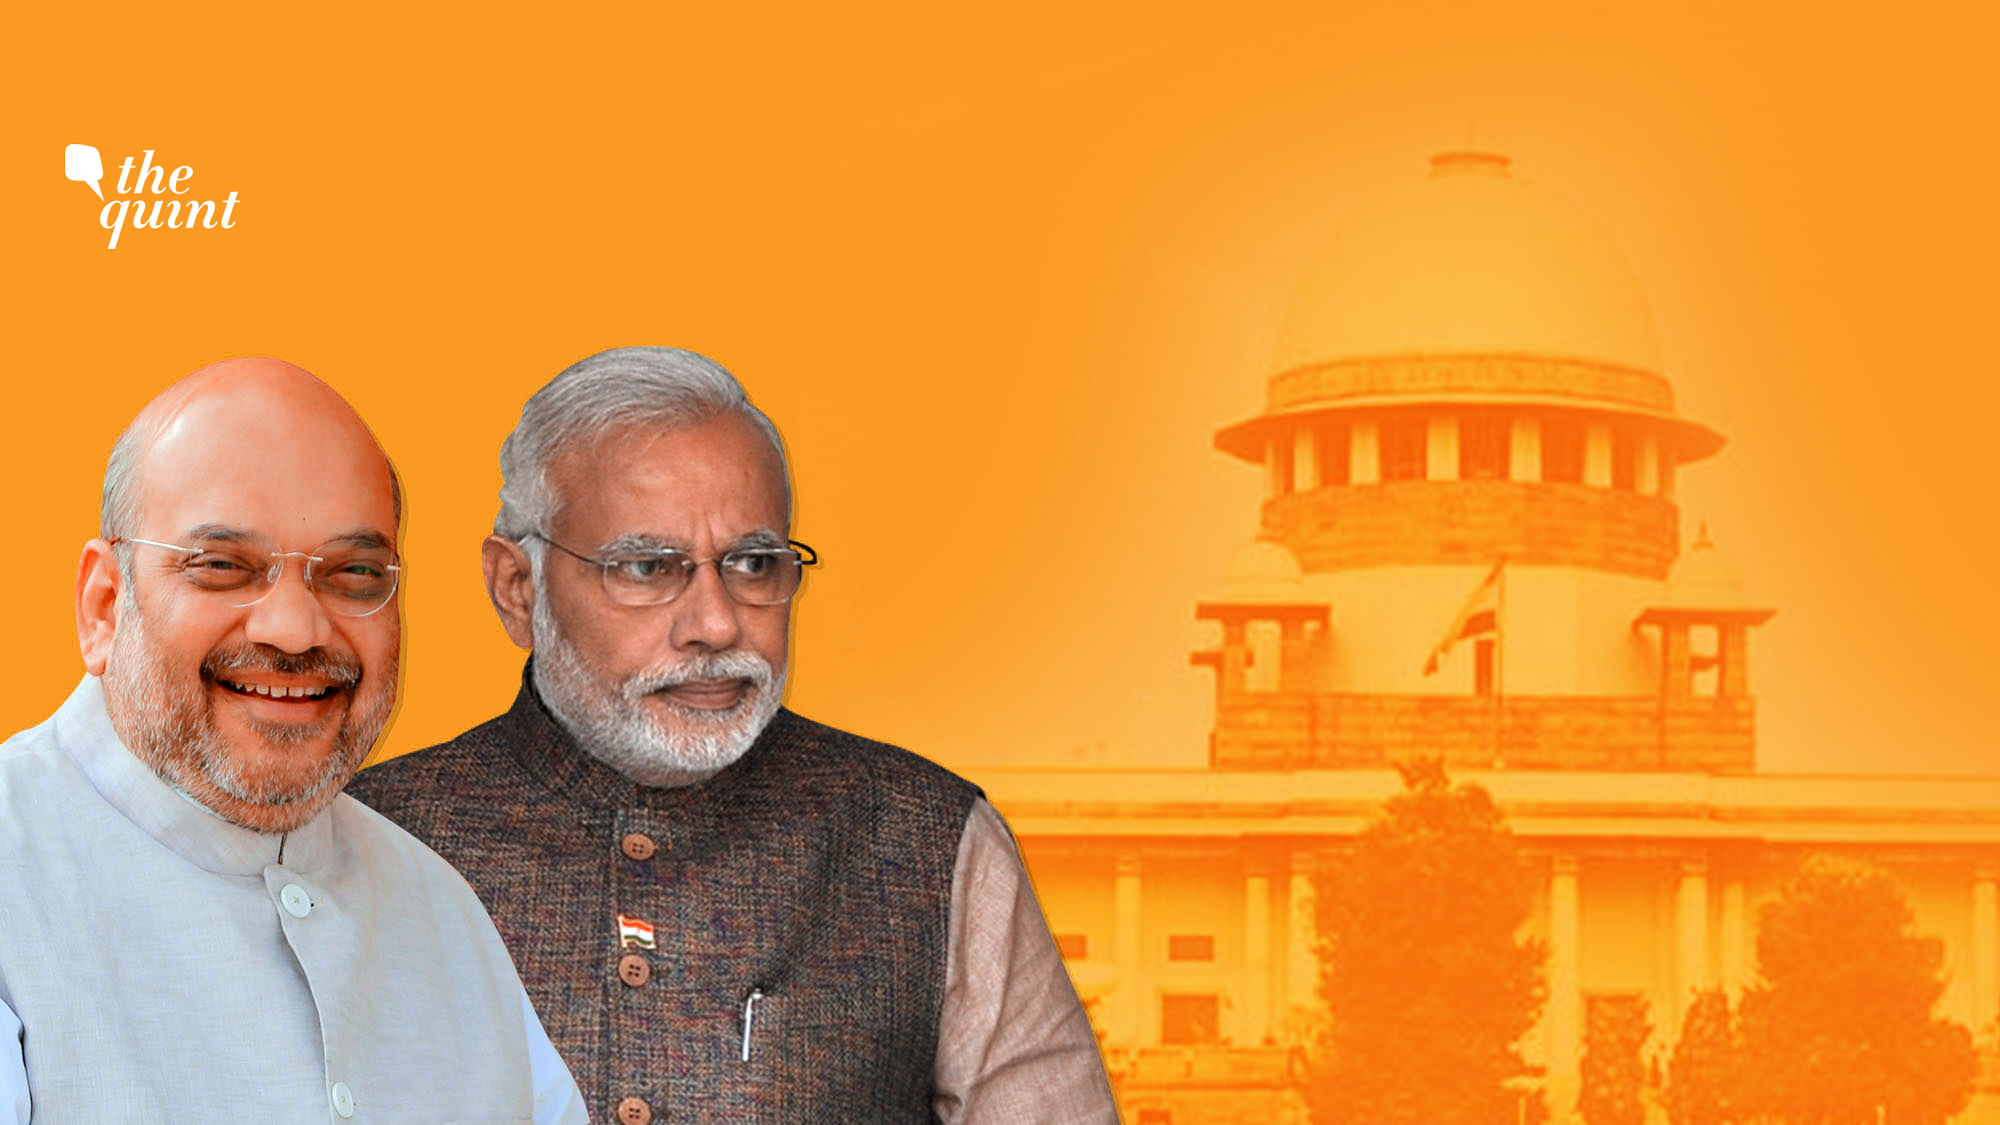 Home Minister Amit Shah and Prime Minister Narendra Modi have taken significant actions in Jammu and Kashmir that are now being challenged in the Supreme Court.